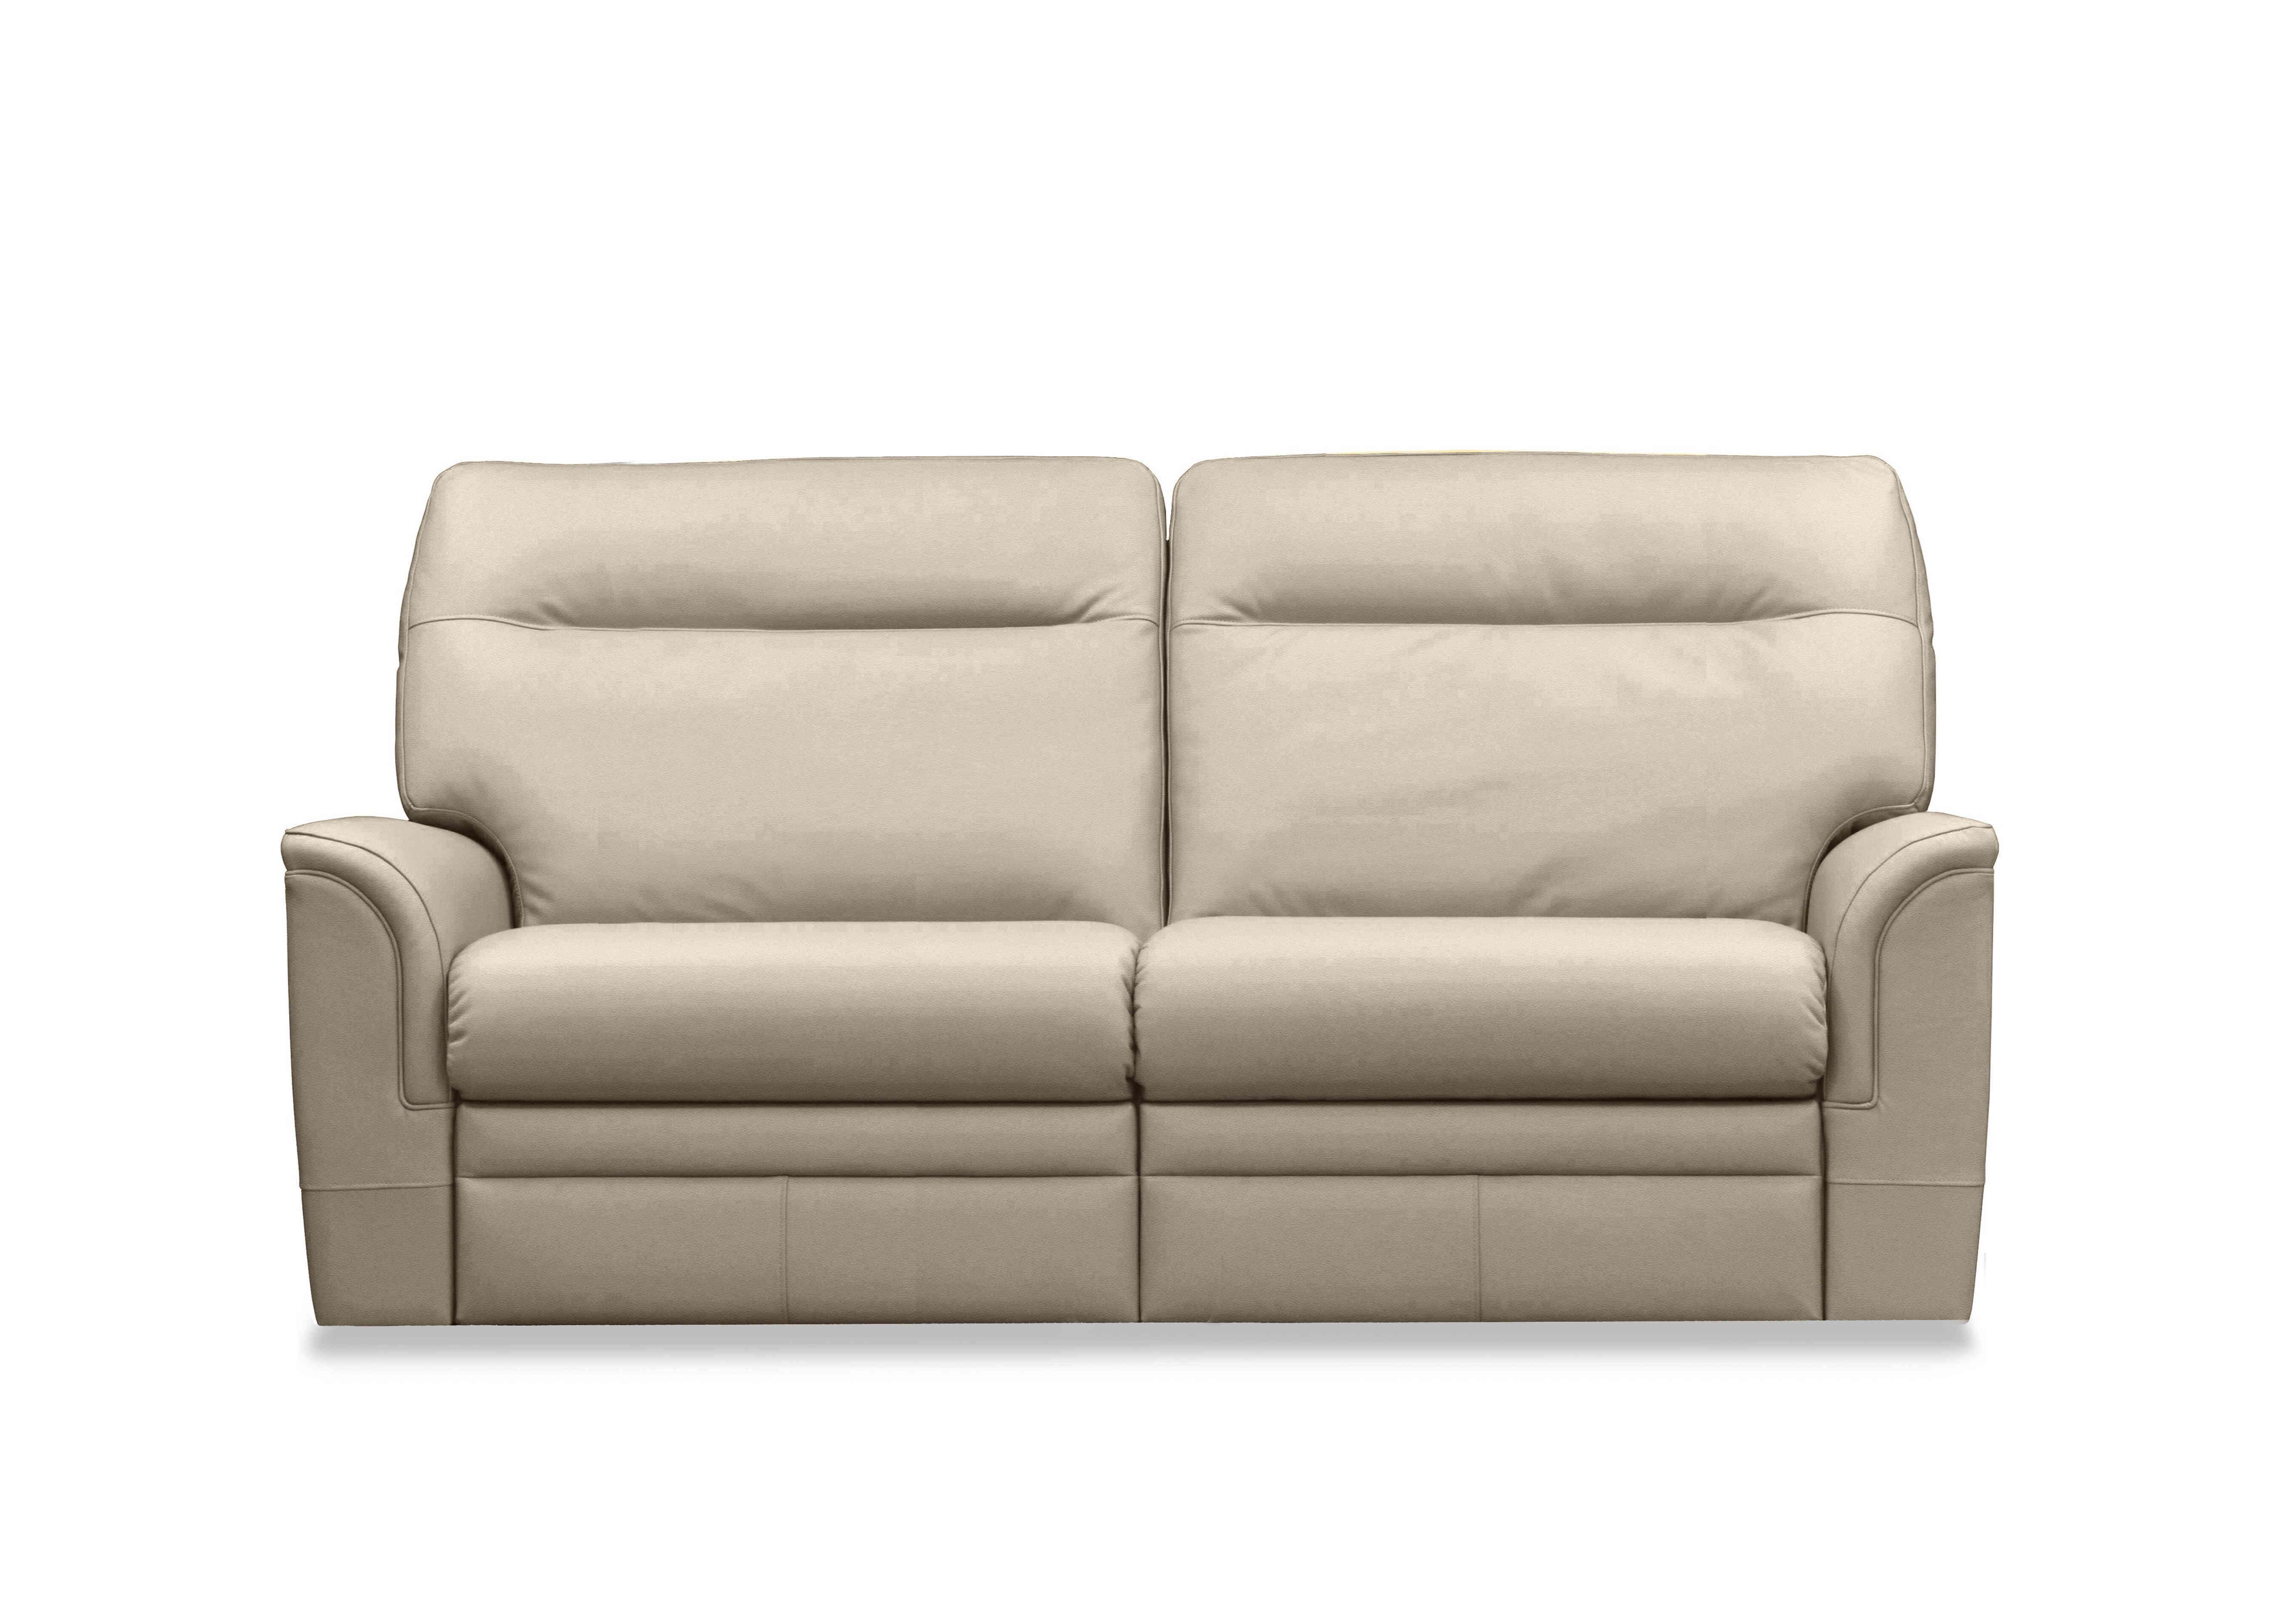 Hudson 23 Large 2 Seater Leather Power Recliner Sofa with Power Headrests and Power Lumbar in Como Taupe 0053051-0019 on Furniture Village